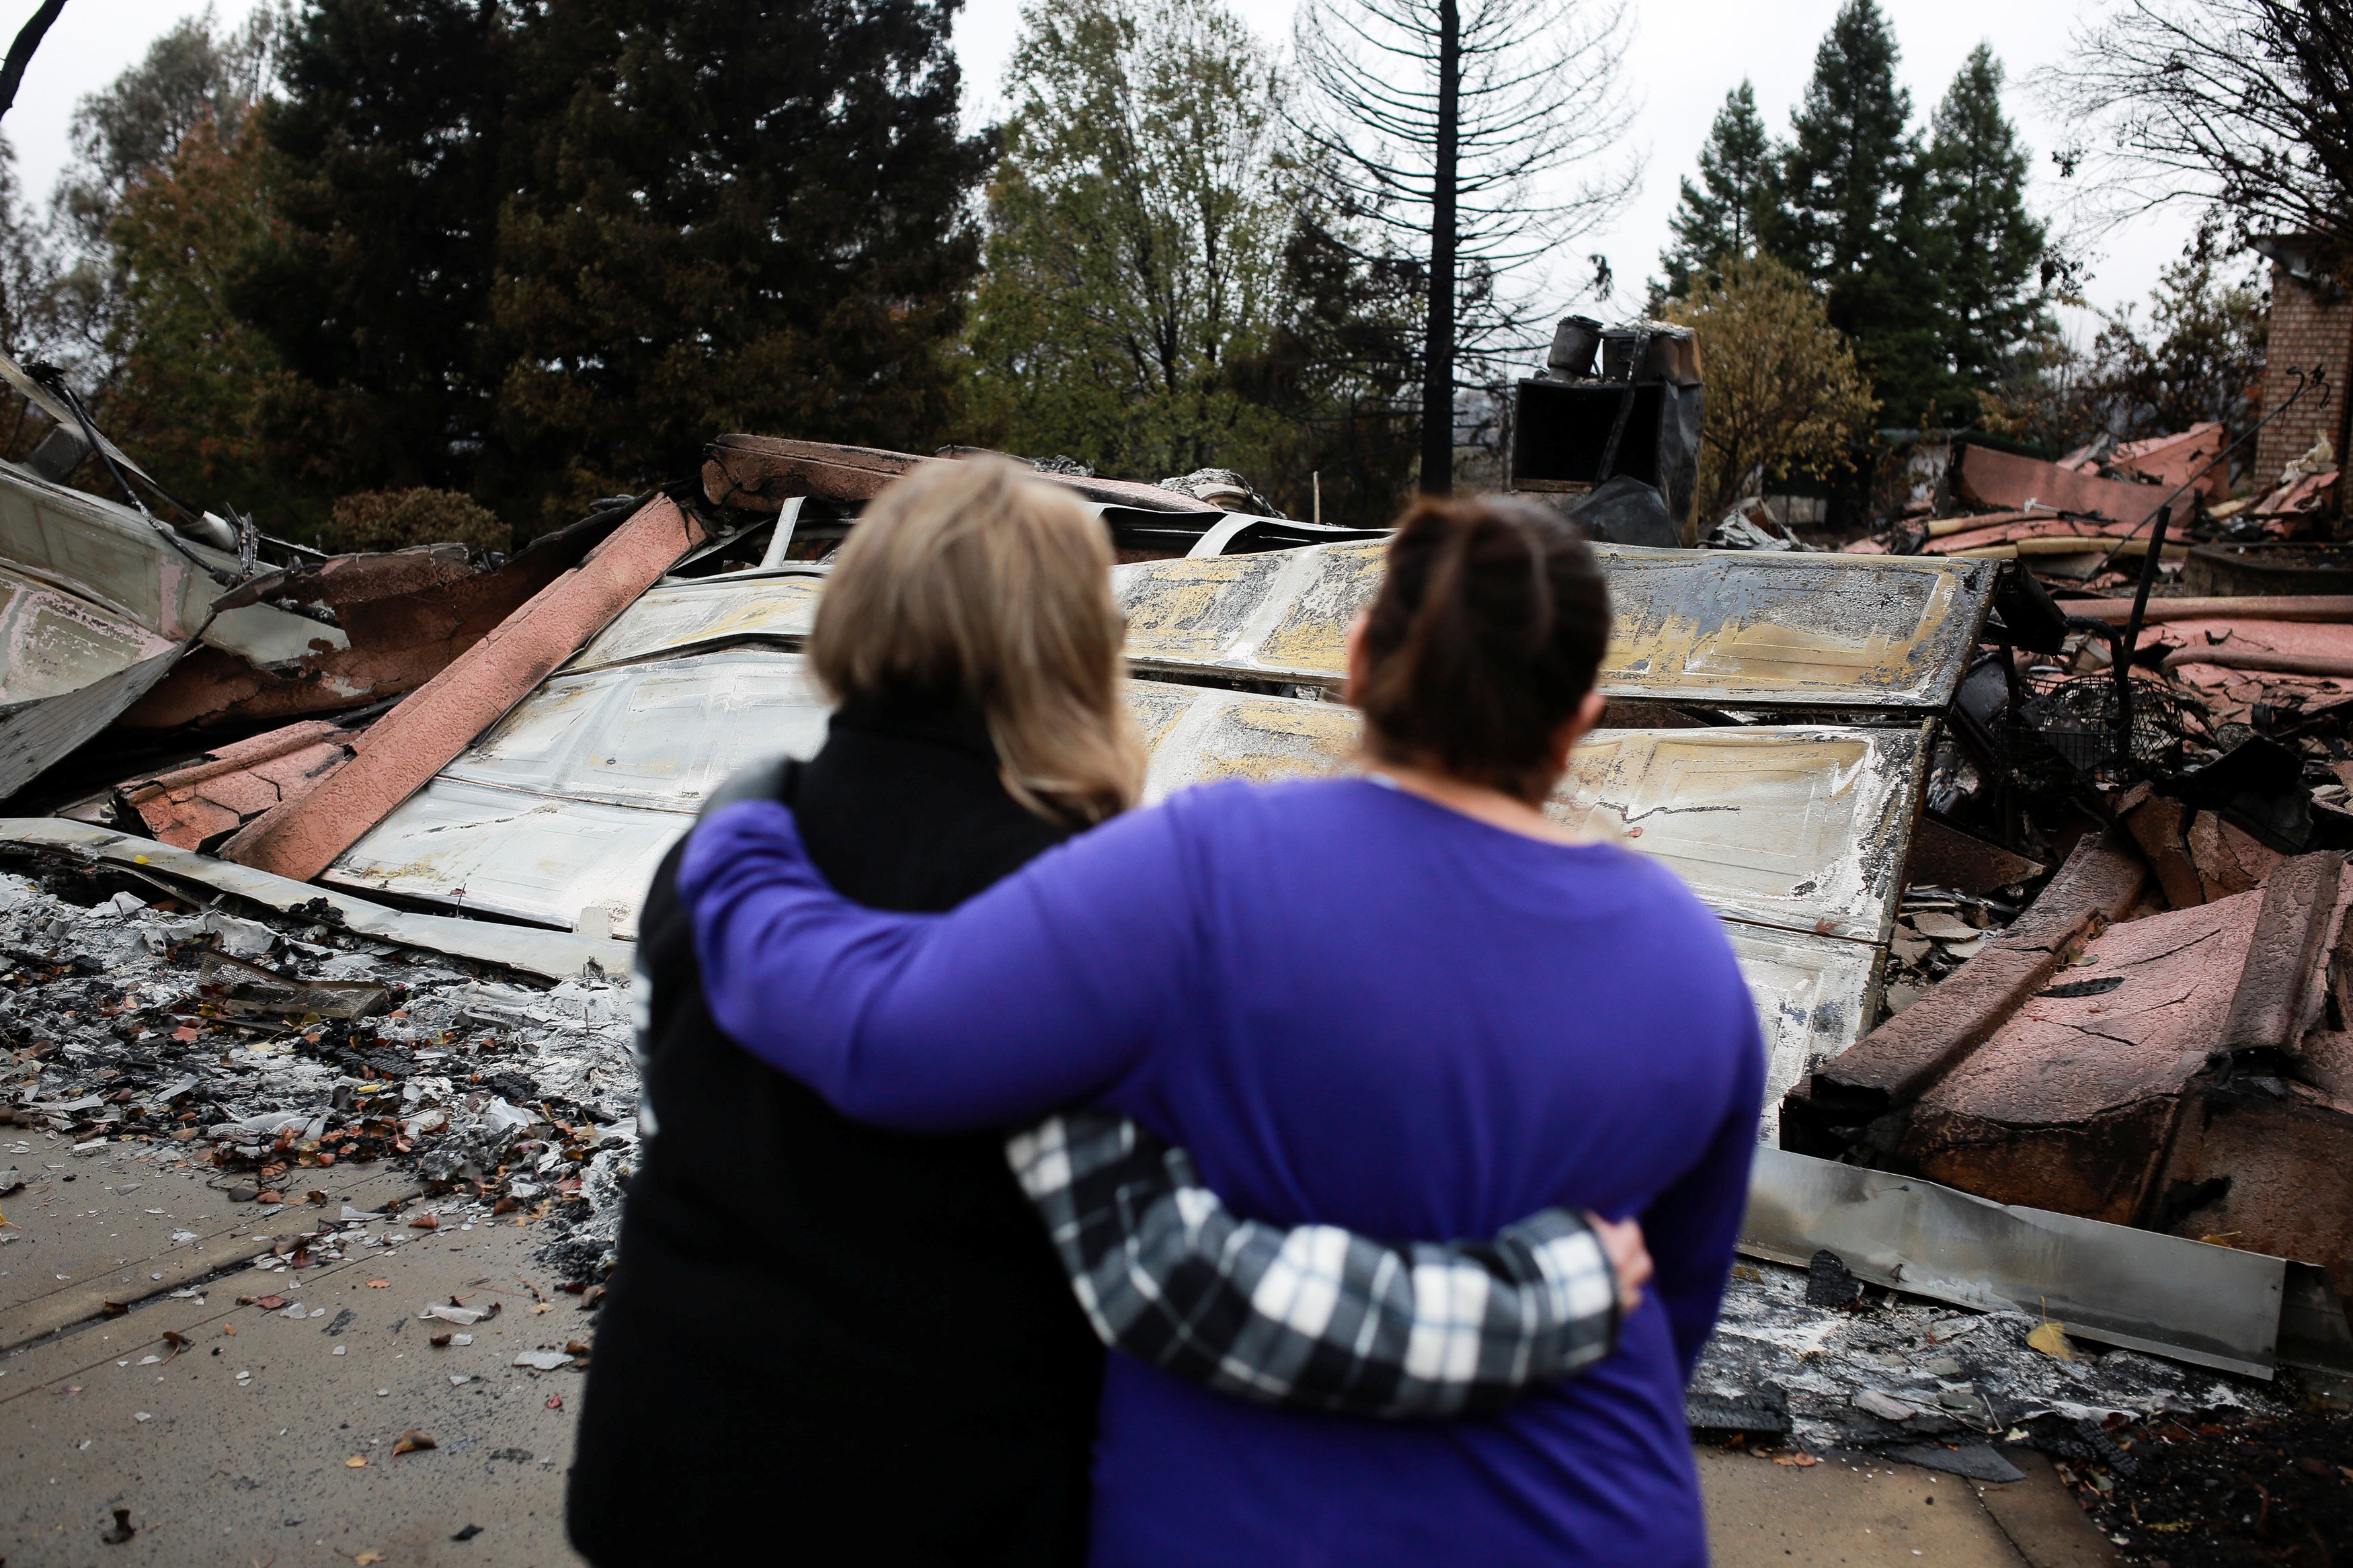 Irma Corona (R) comforts neighbor Gerryann Wulbern in front of the remains of Wulbern's home after the two returned for the first time since the Camp Fire in Paradise, California, U.S. November 22, 2018. REUTERS/Elijah Nouvelage